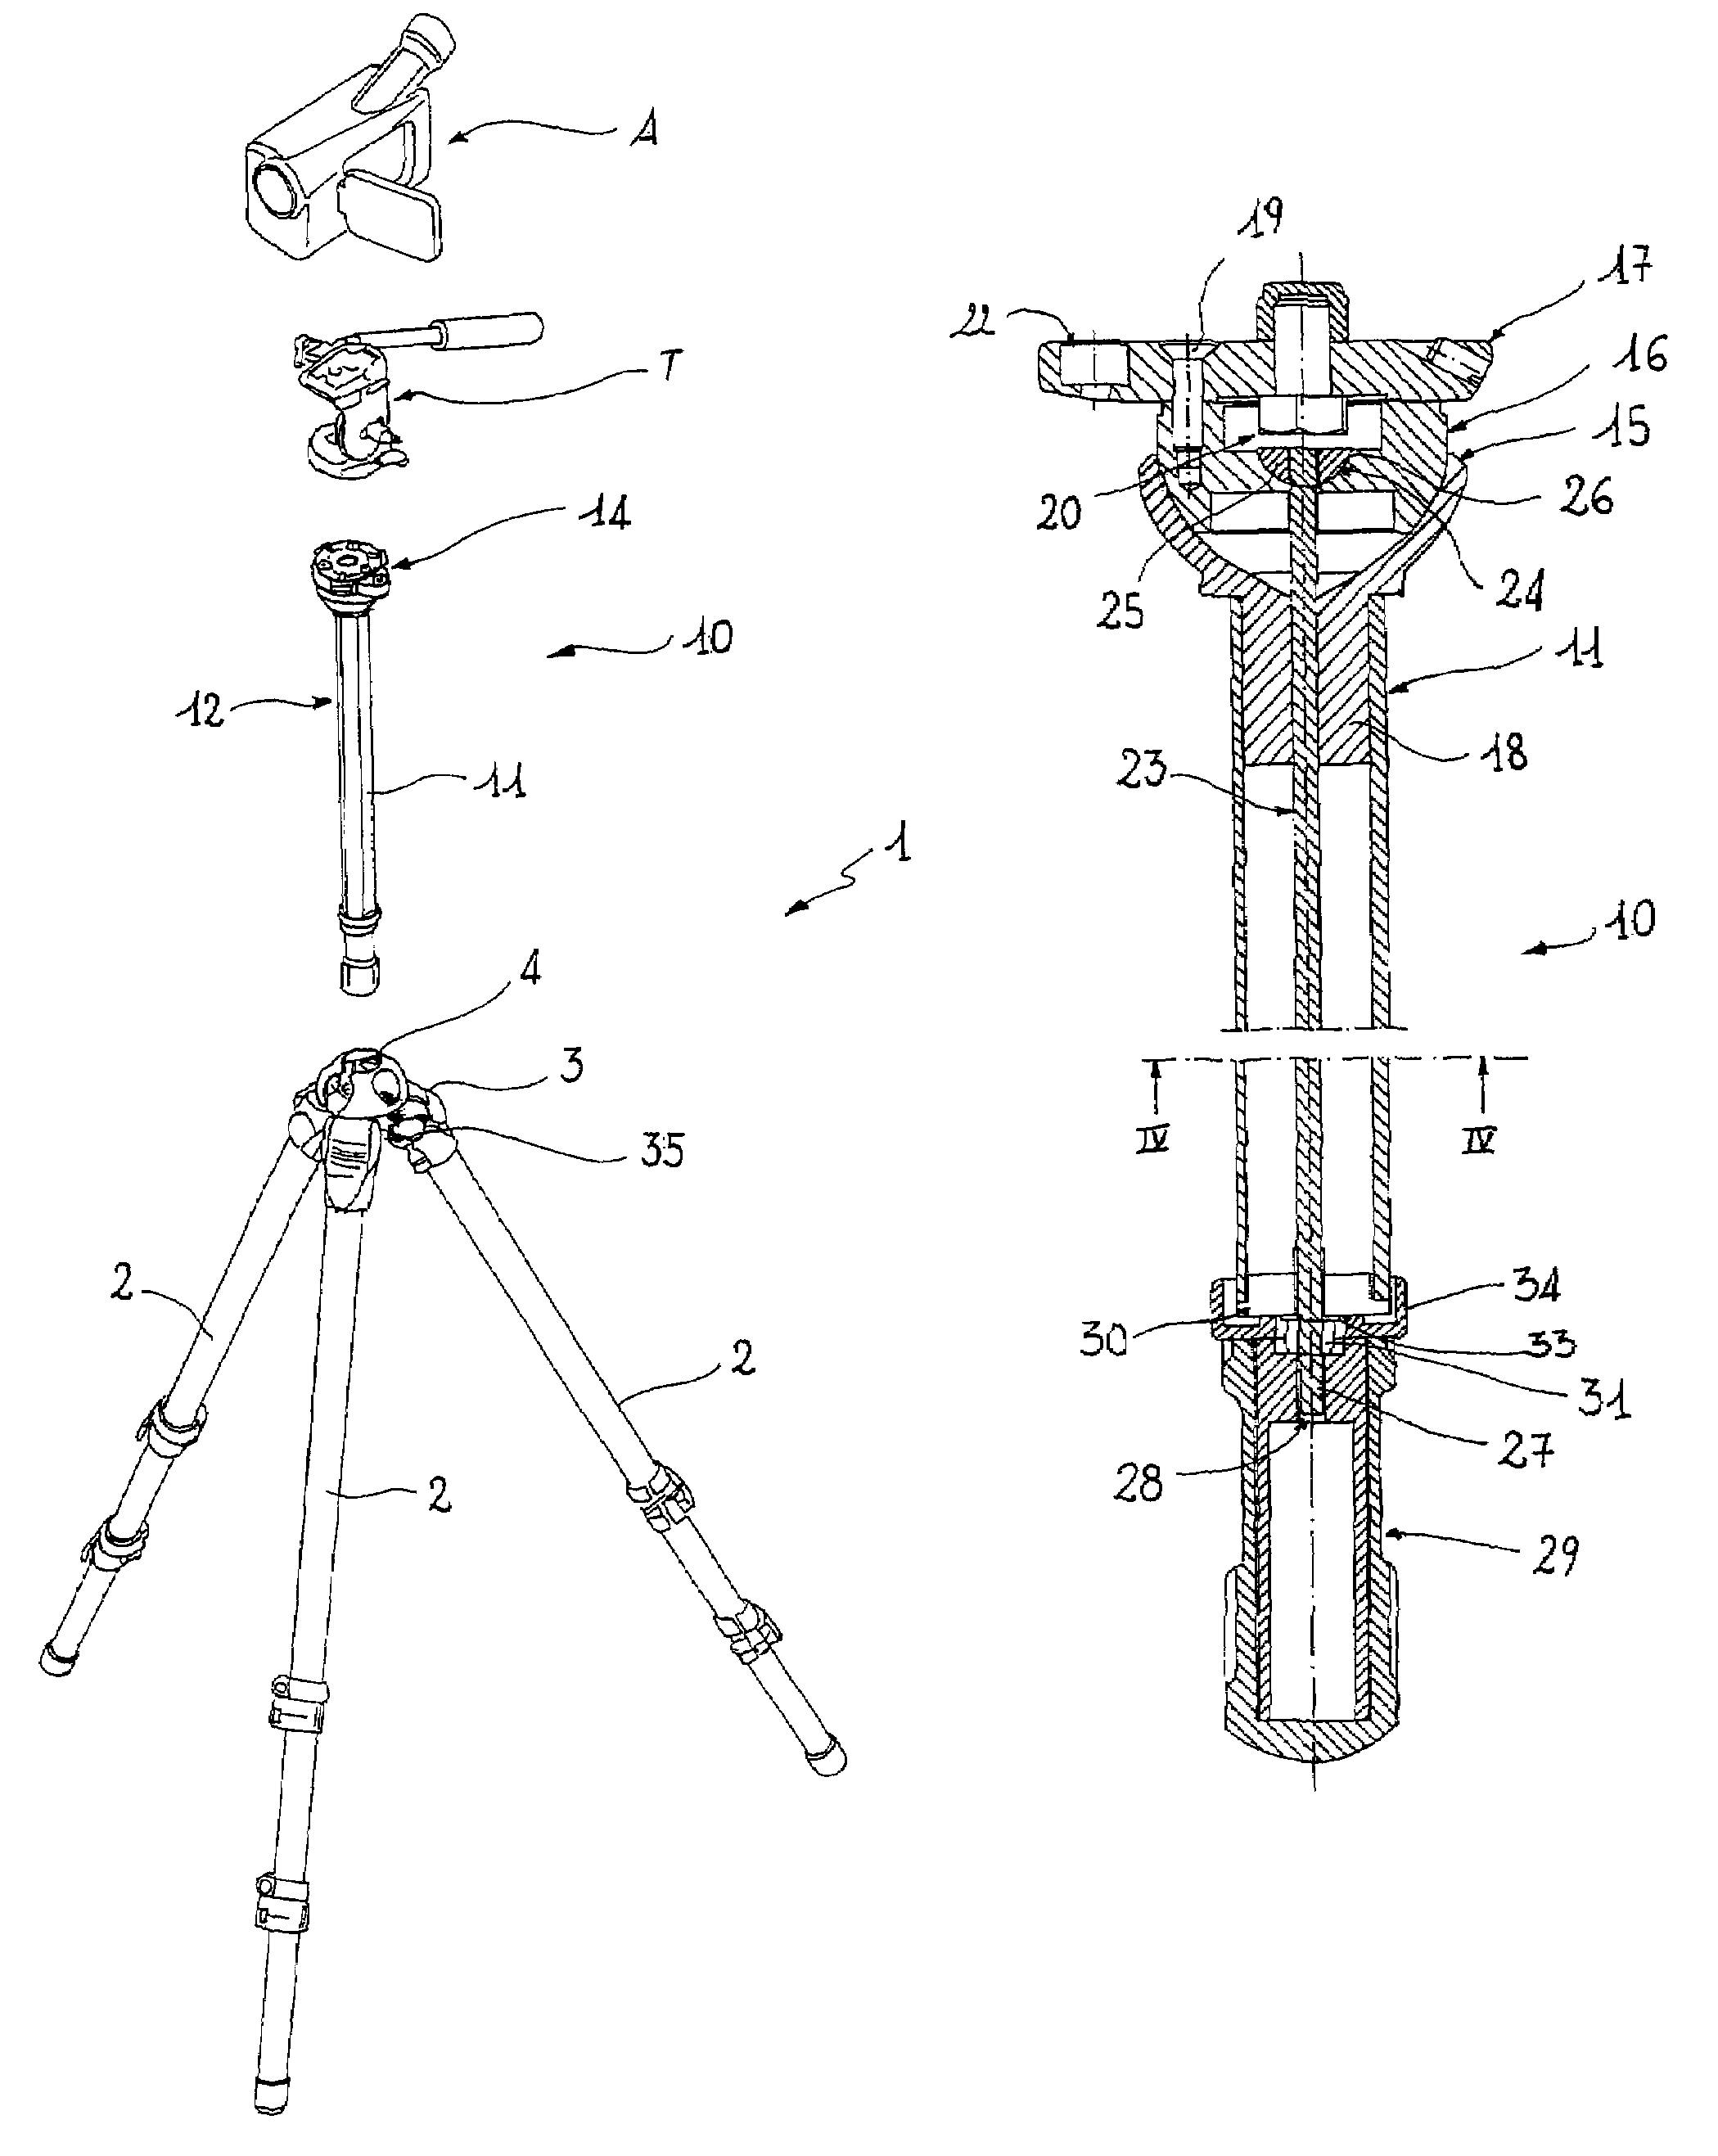 Support for apparatus in general and, in particular, for optical or photographic apparatus and the like